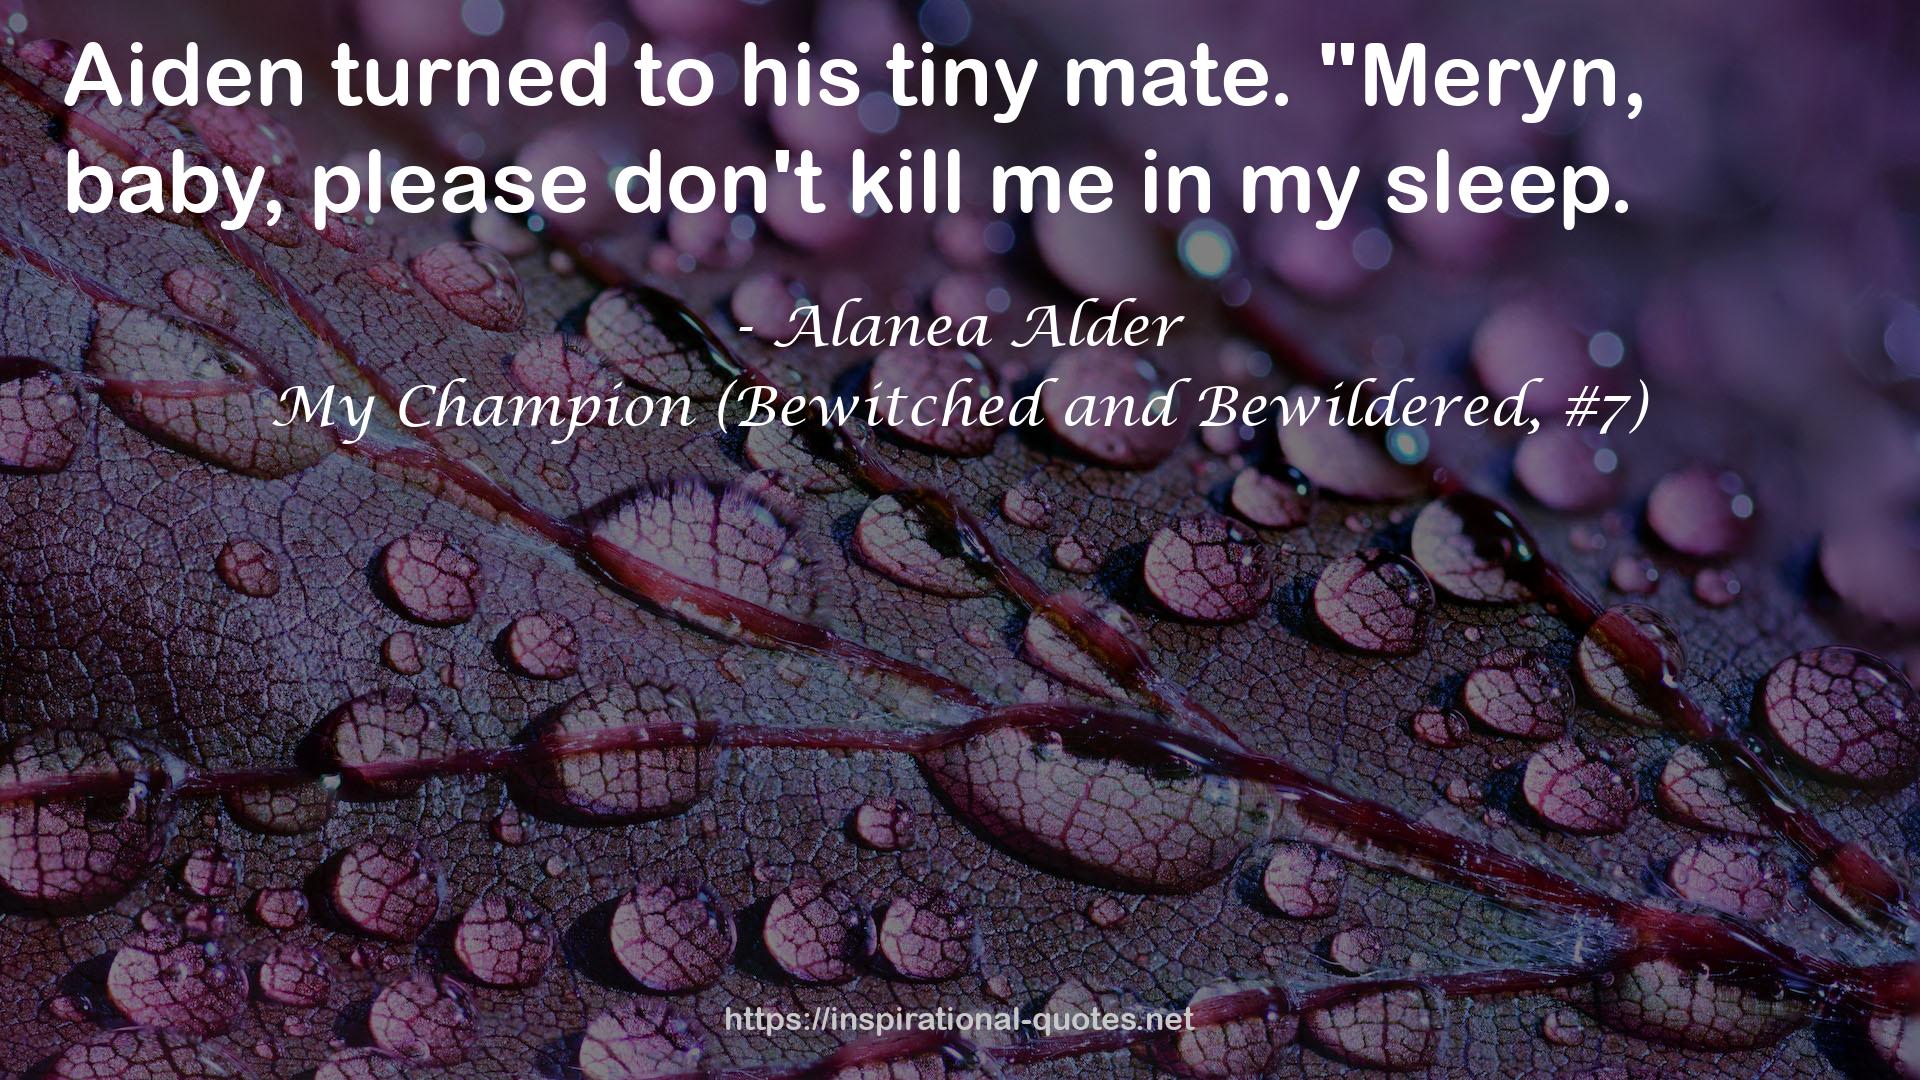 My Champion (Bewitched and Bewildered, #7) QUOTES